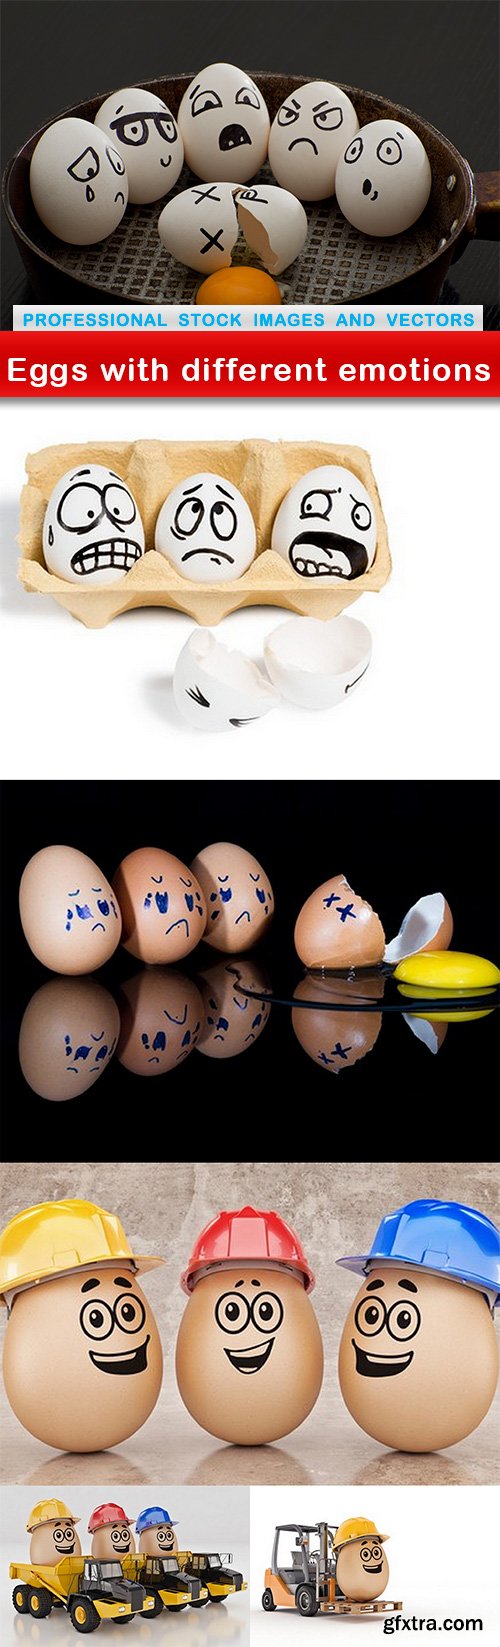 Eggs with different emotions - 6 UHQ JPEG